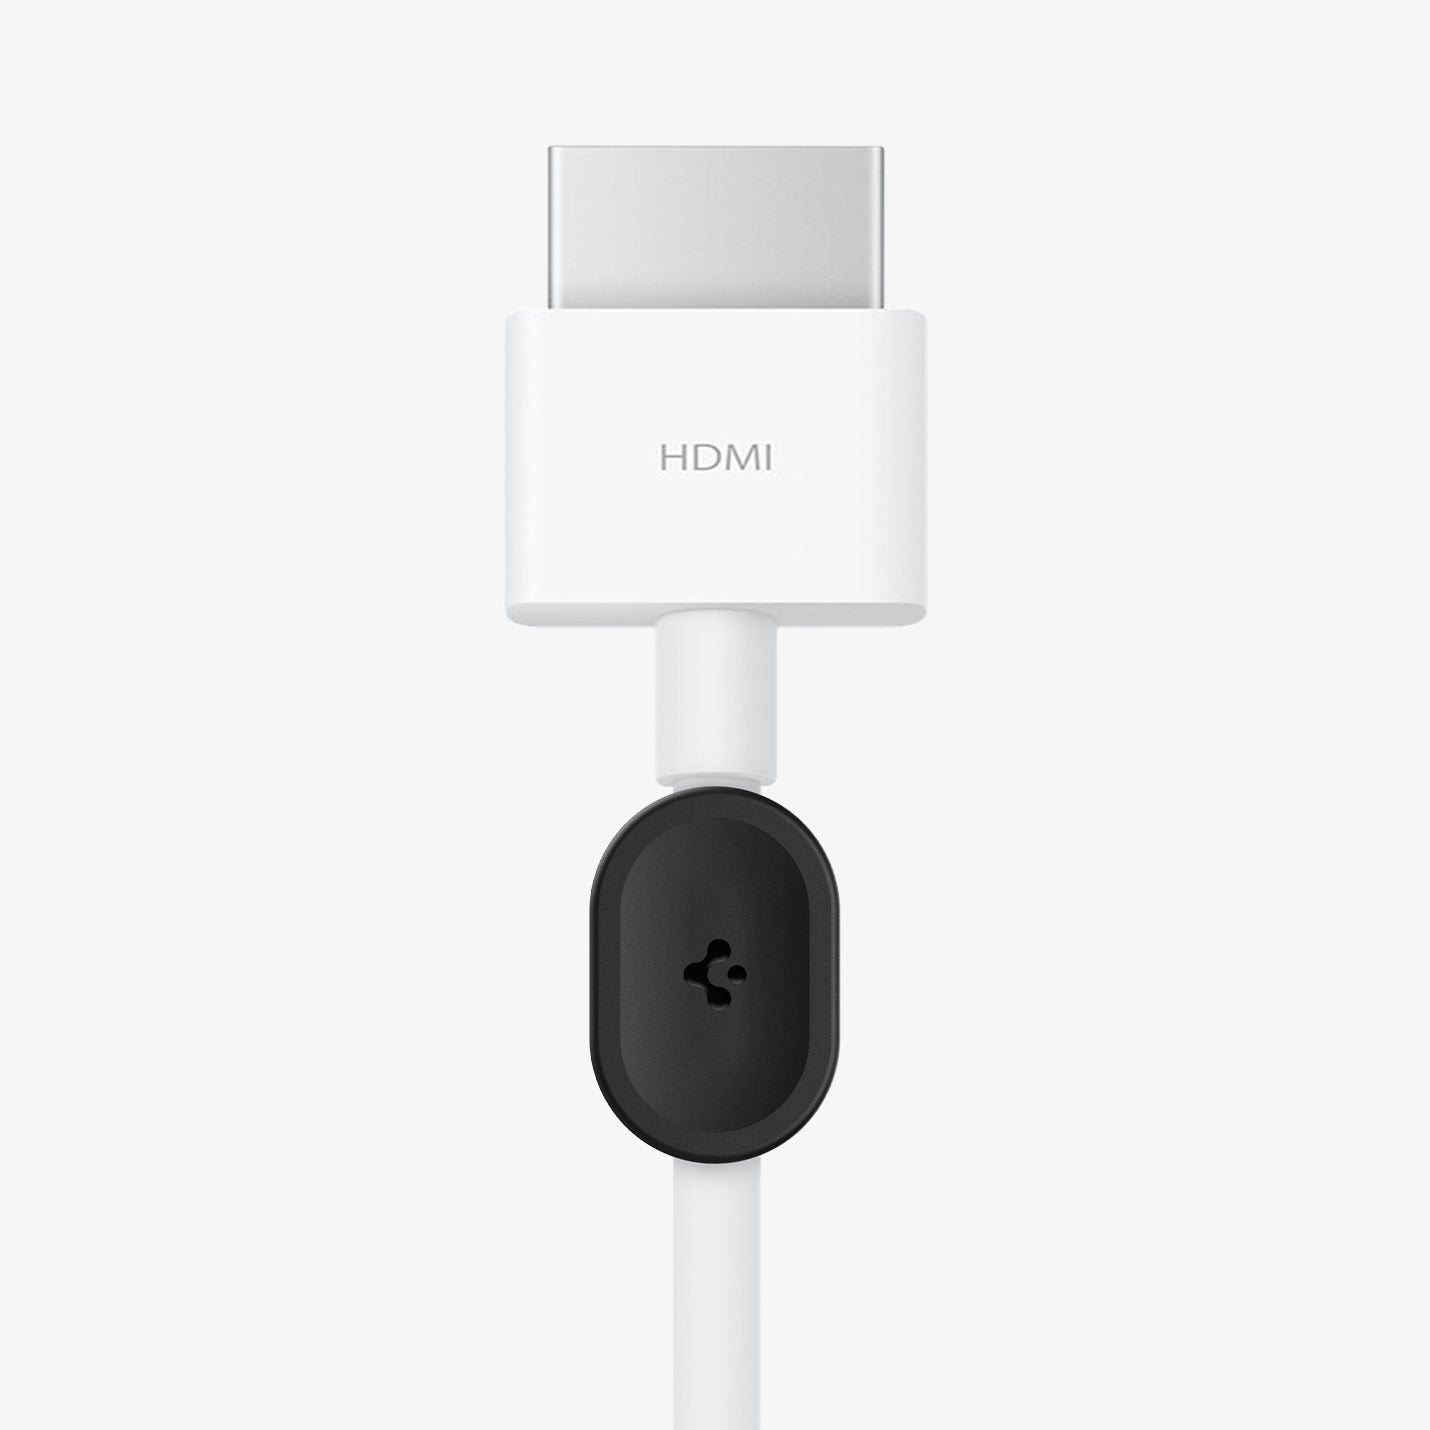 ACA04604 - LD101 Magnetic Cable Holder in black showing a HDMI cable attached to cable holder